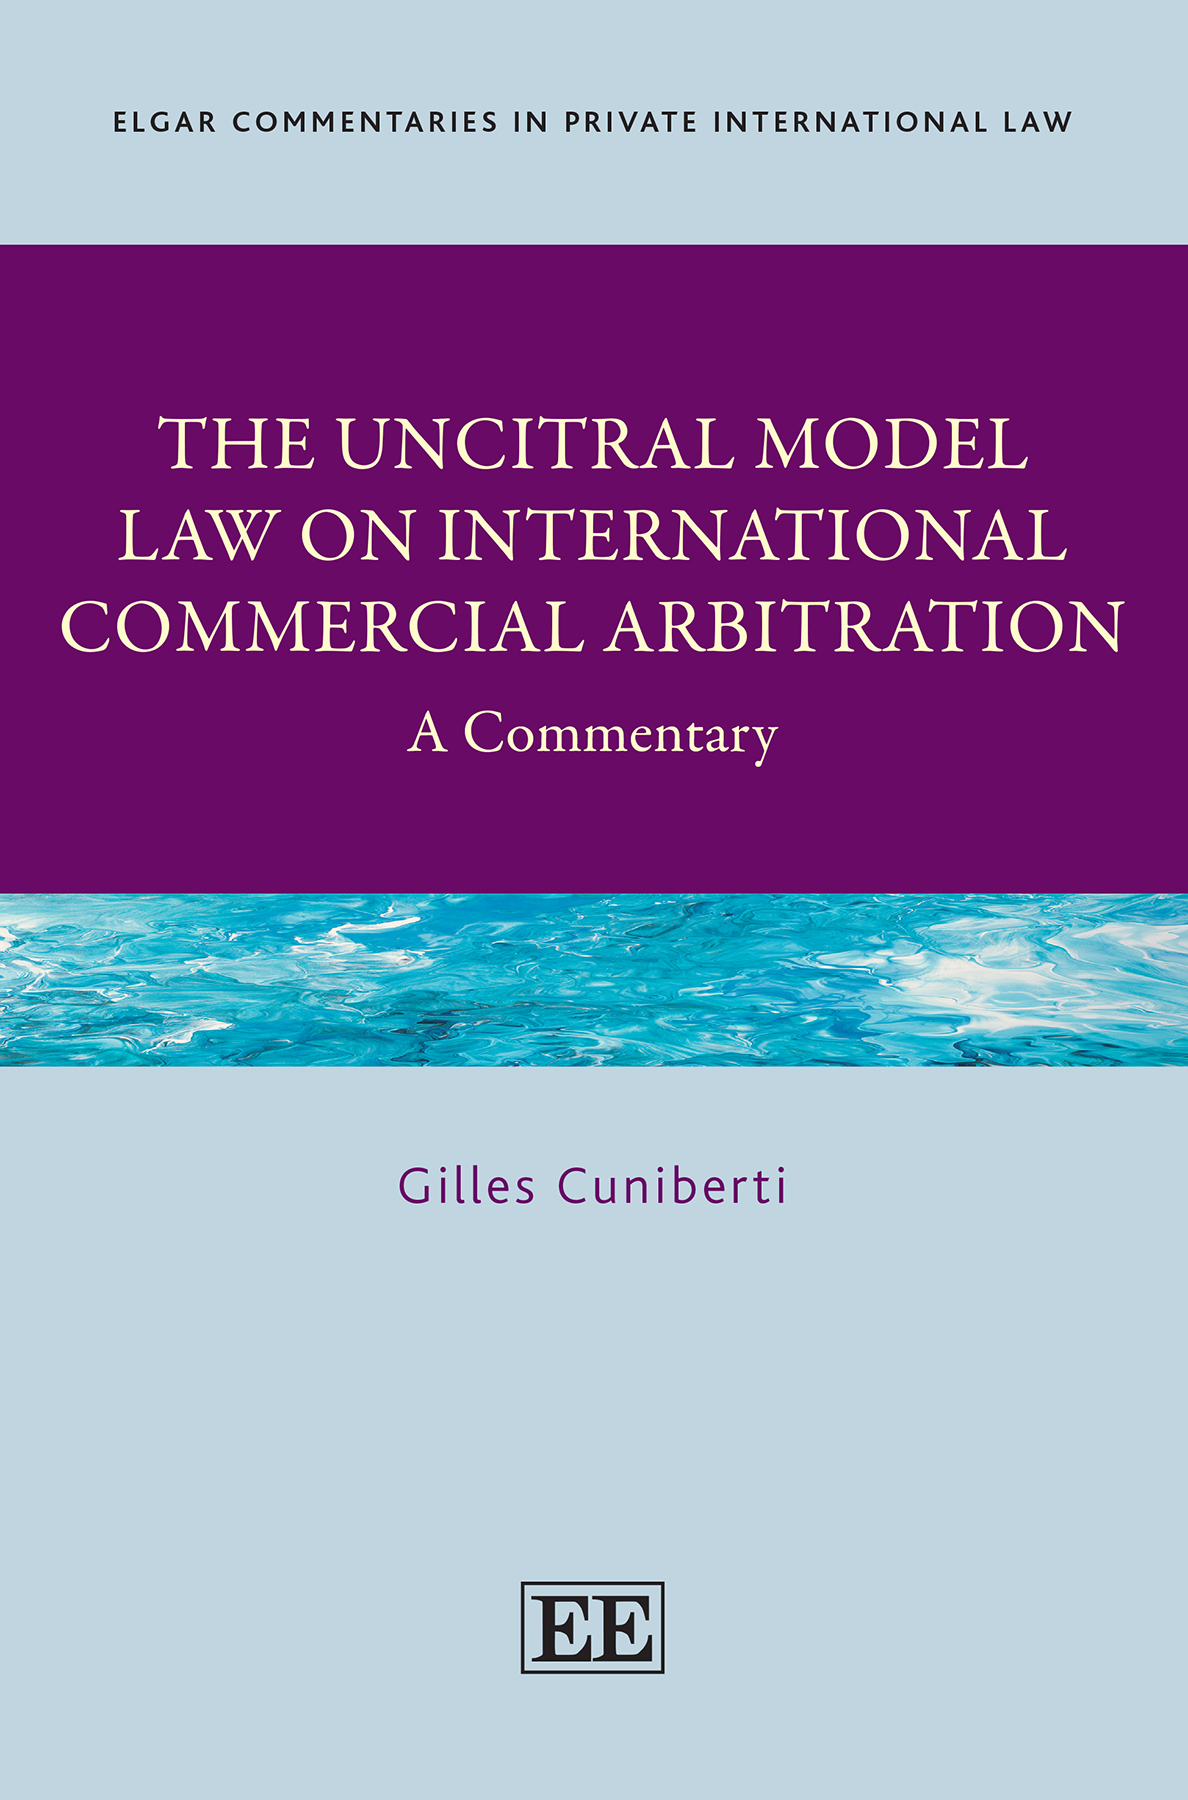 The UNCITRAL Model Law on International Commercial Arbitration – A Commentary